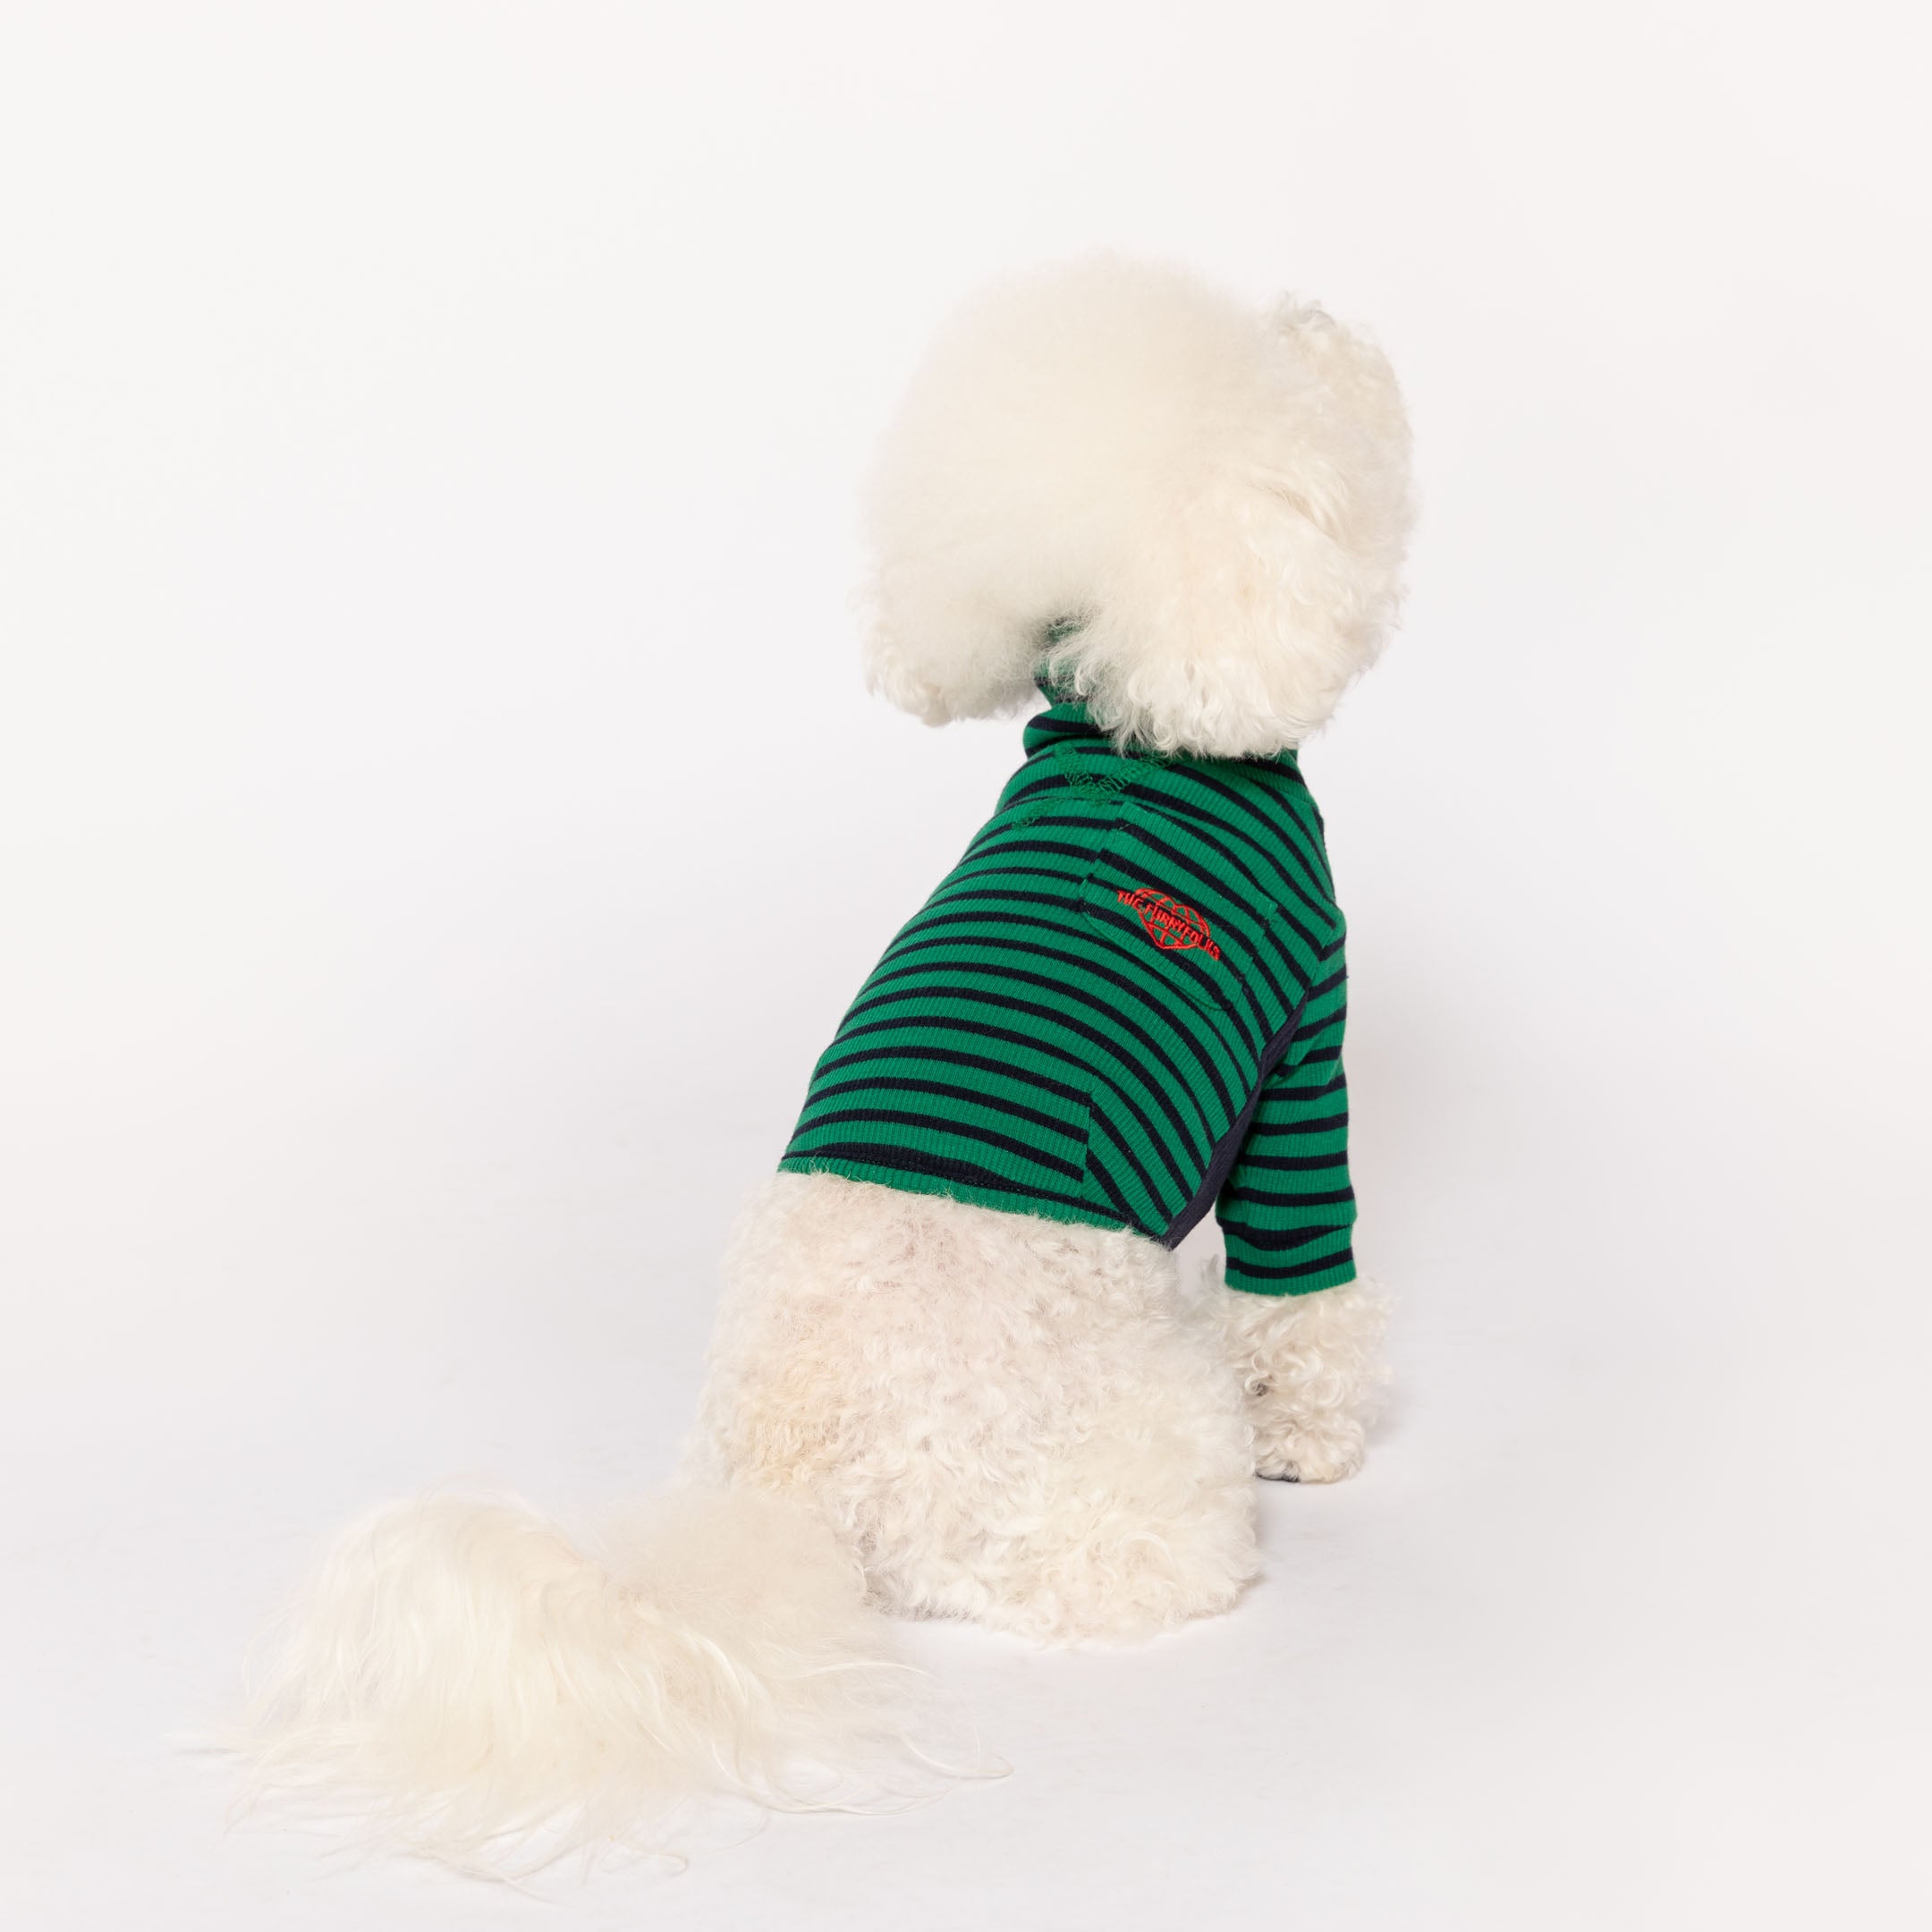 Elegant Bichon Frise in a green striped shirt with back turned, showcasing the latest dog fashion trend.